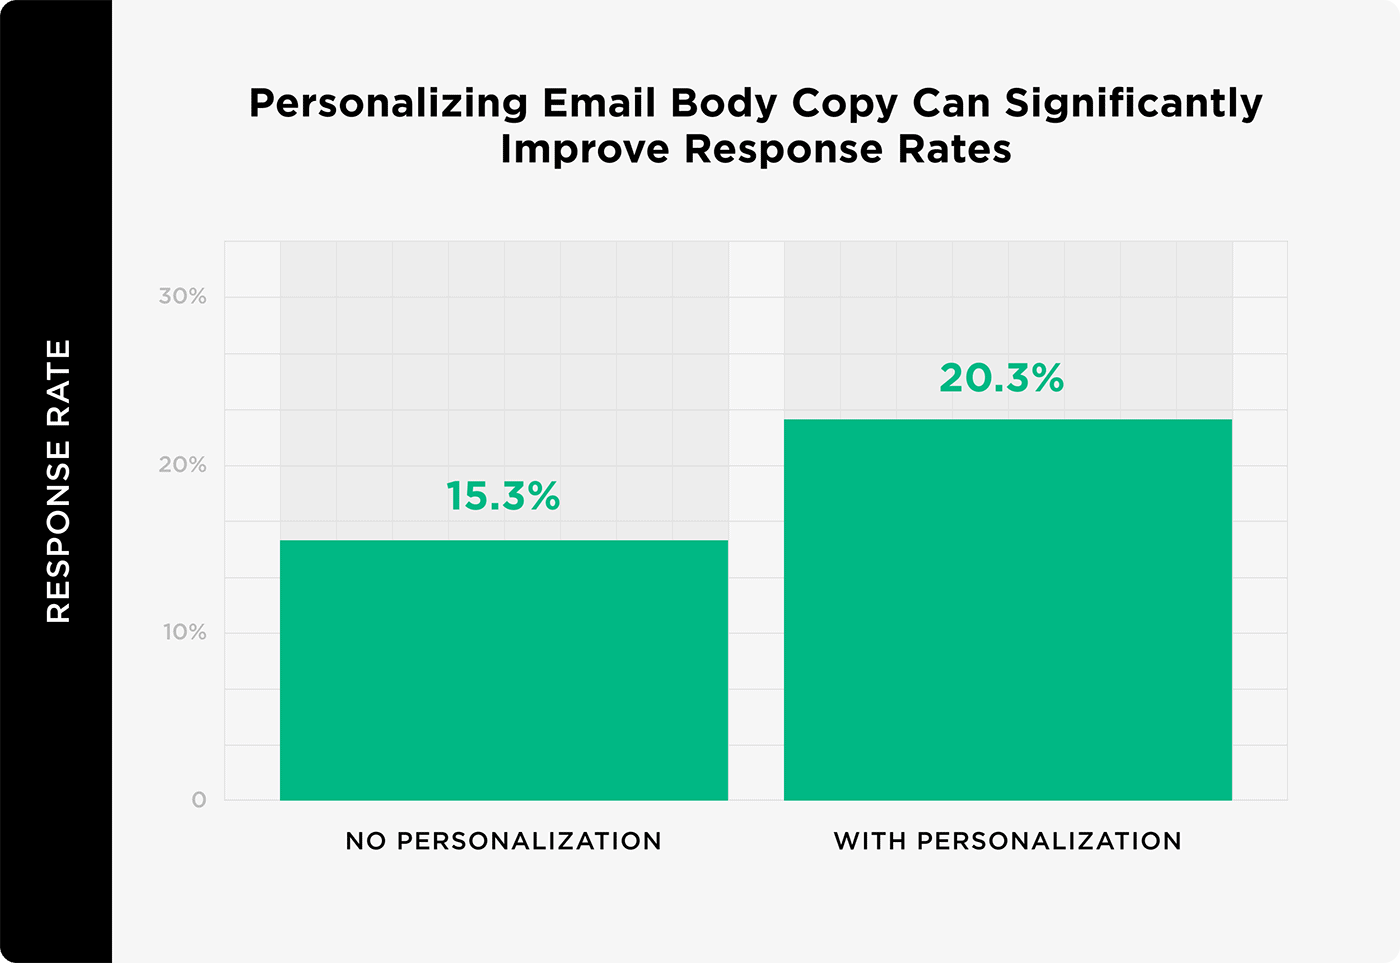 Personalizing email body copy can significantly improve response rates